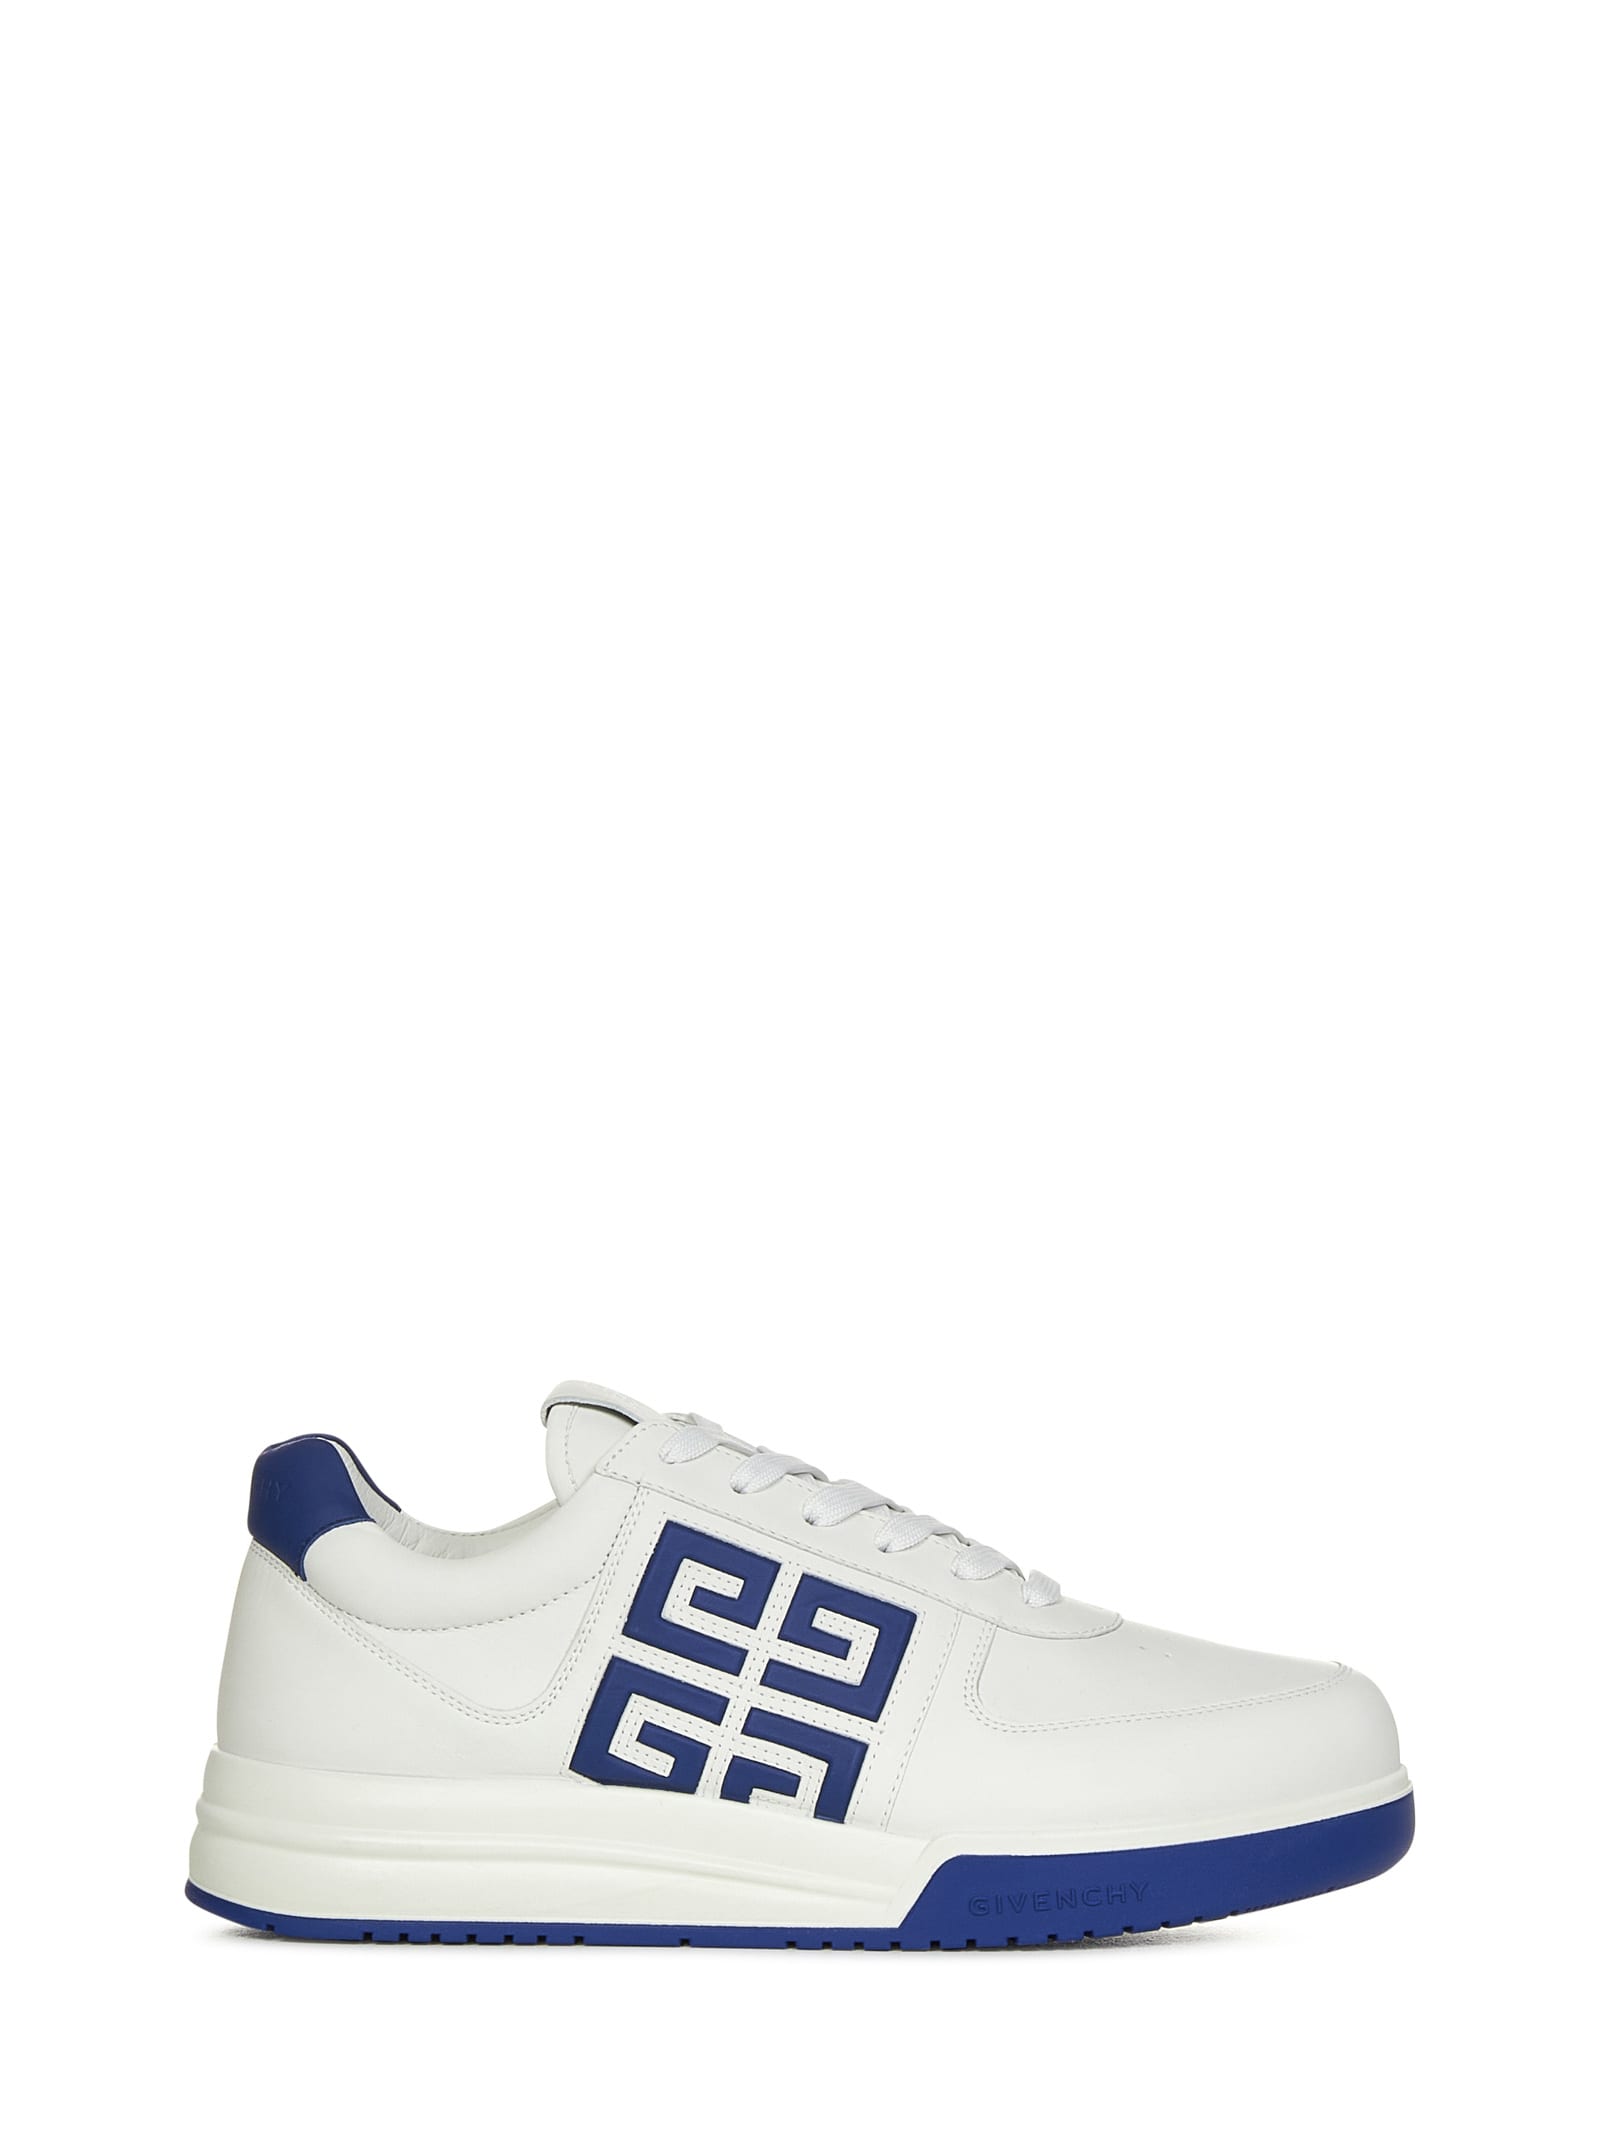 GIVENCHY G4 trainers